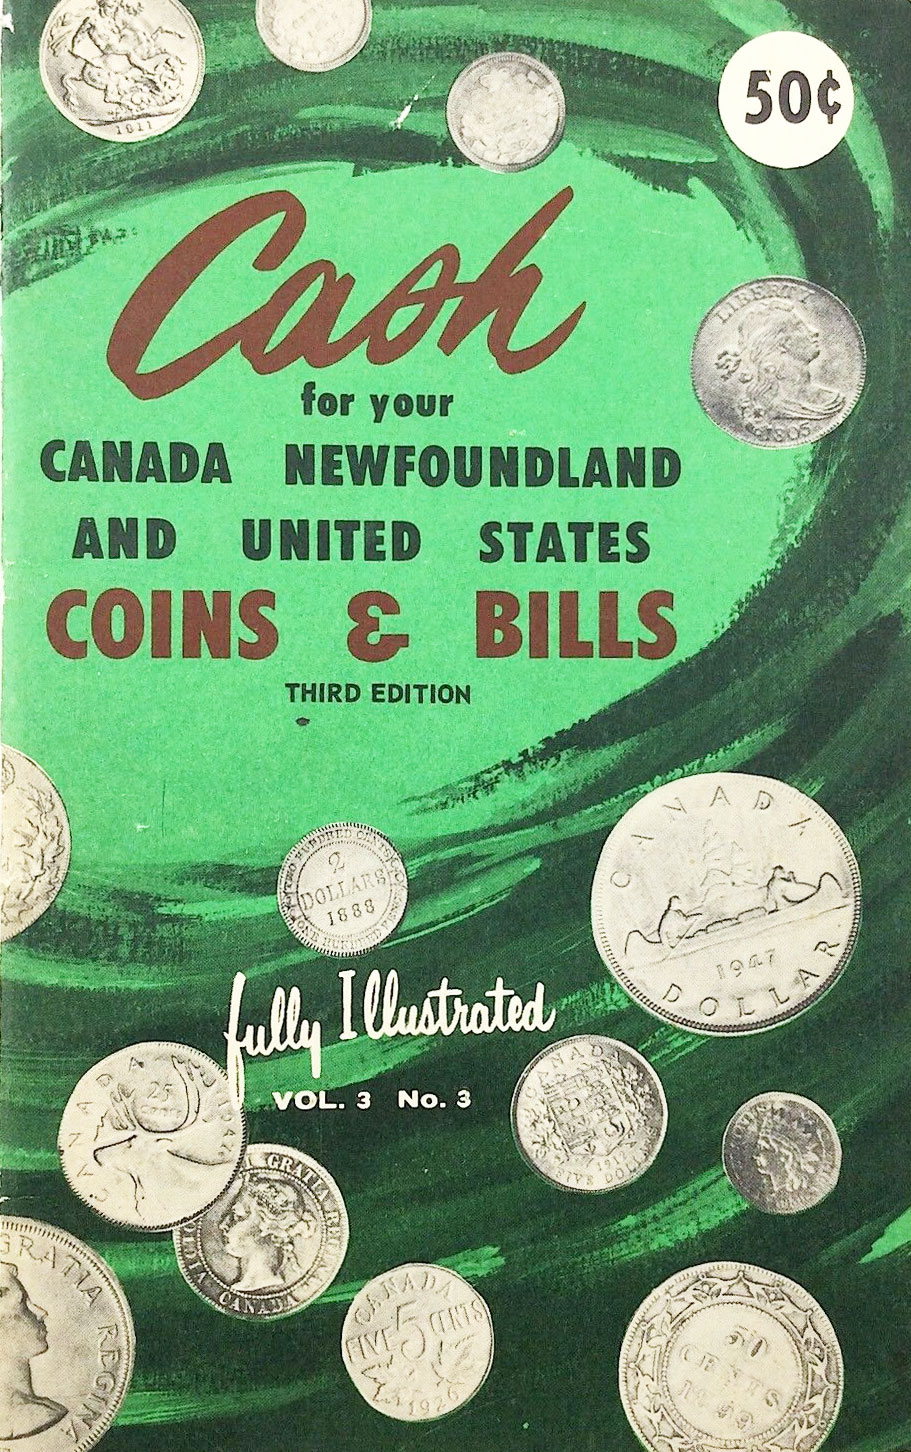 Cash for your Canada Newfoundland and United States Coins & Bills Vol. 3 No. 3